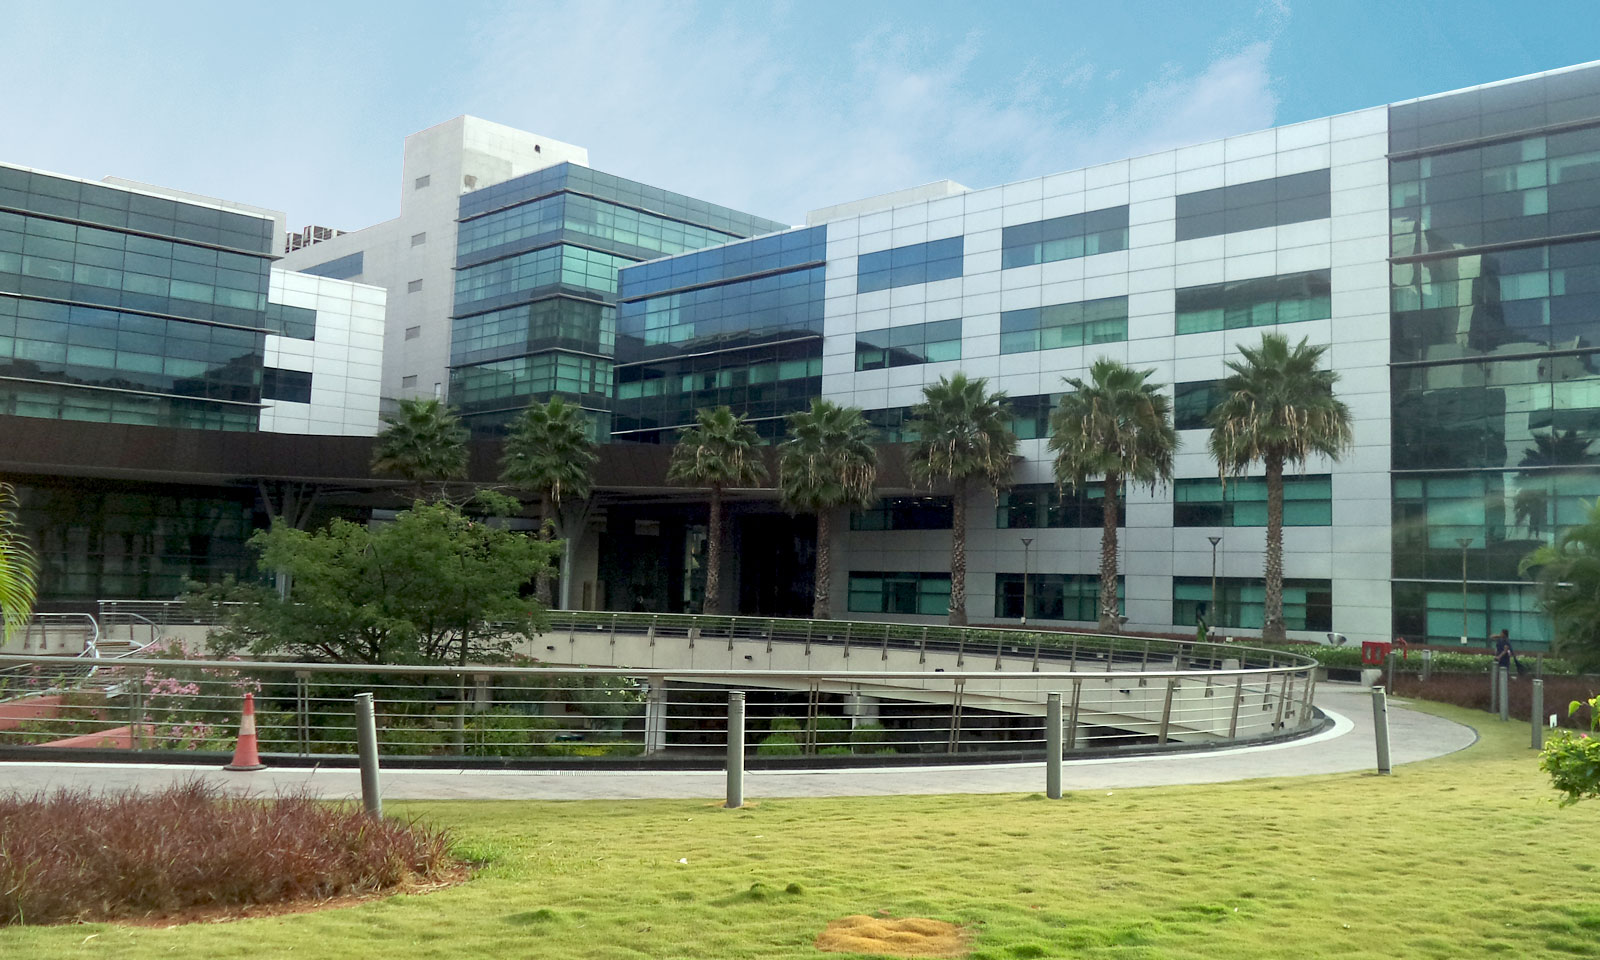 synopsys in bangalore